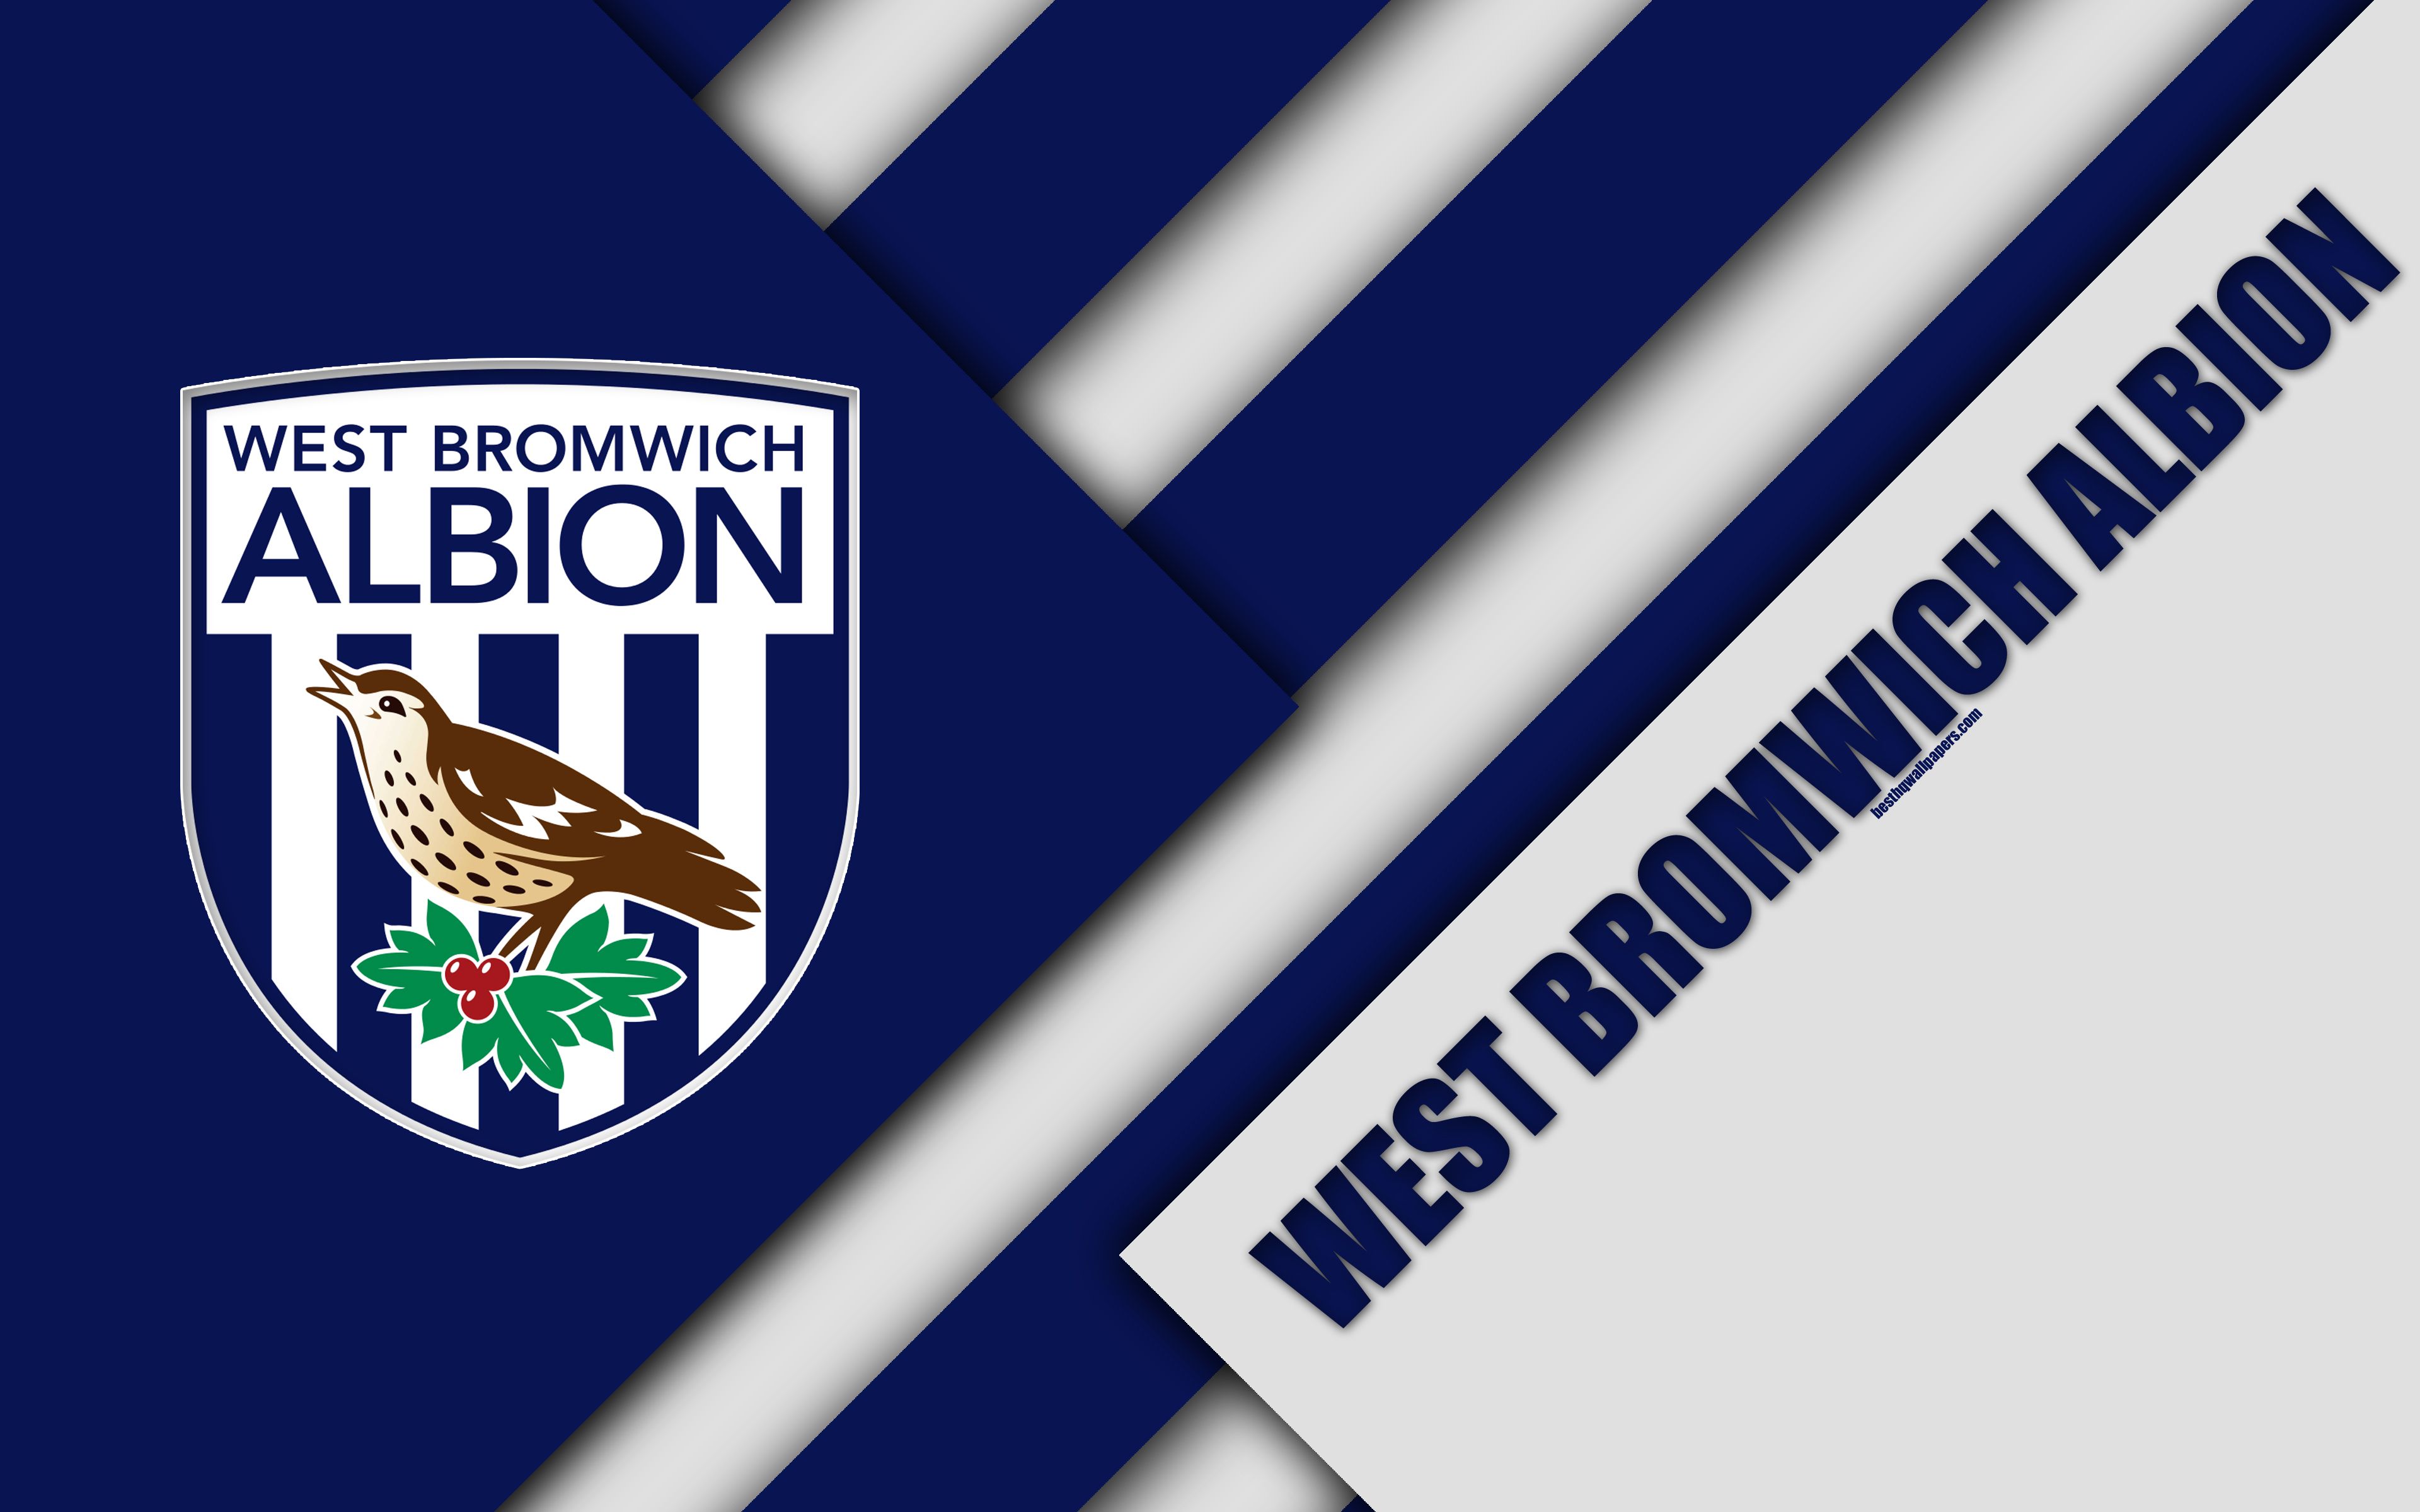 Download wallpapers West Bromwich Albion FC, logo, 4k, material design